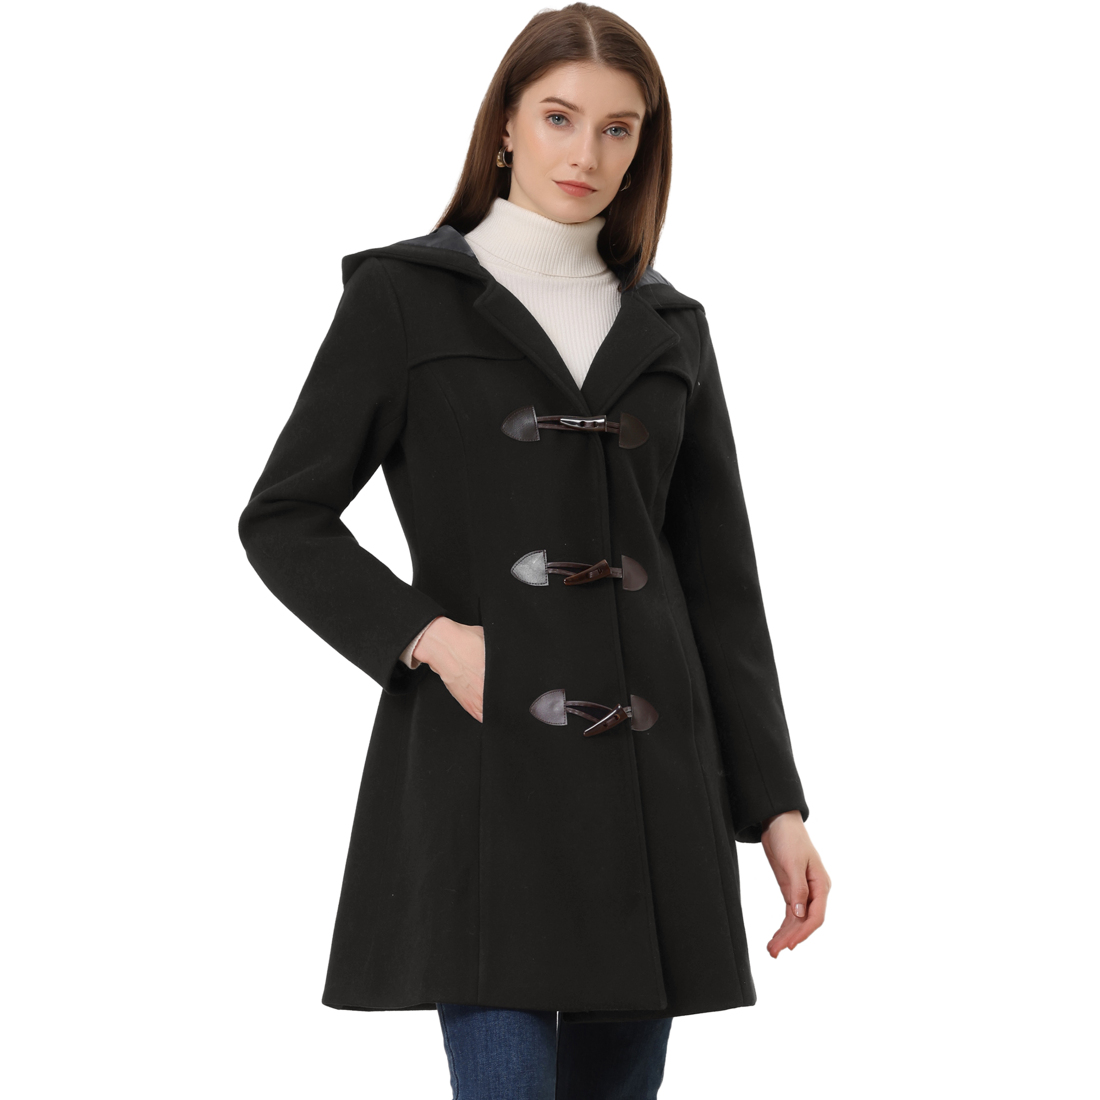 Unique Bargains Women's Hooded Toggle Button Up Duffle Coat Winter Outwear